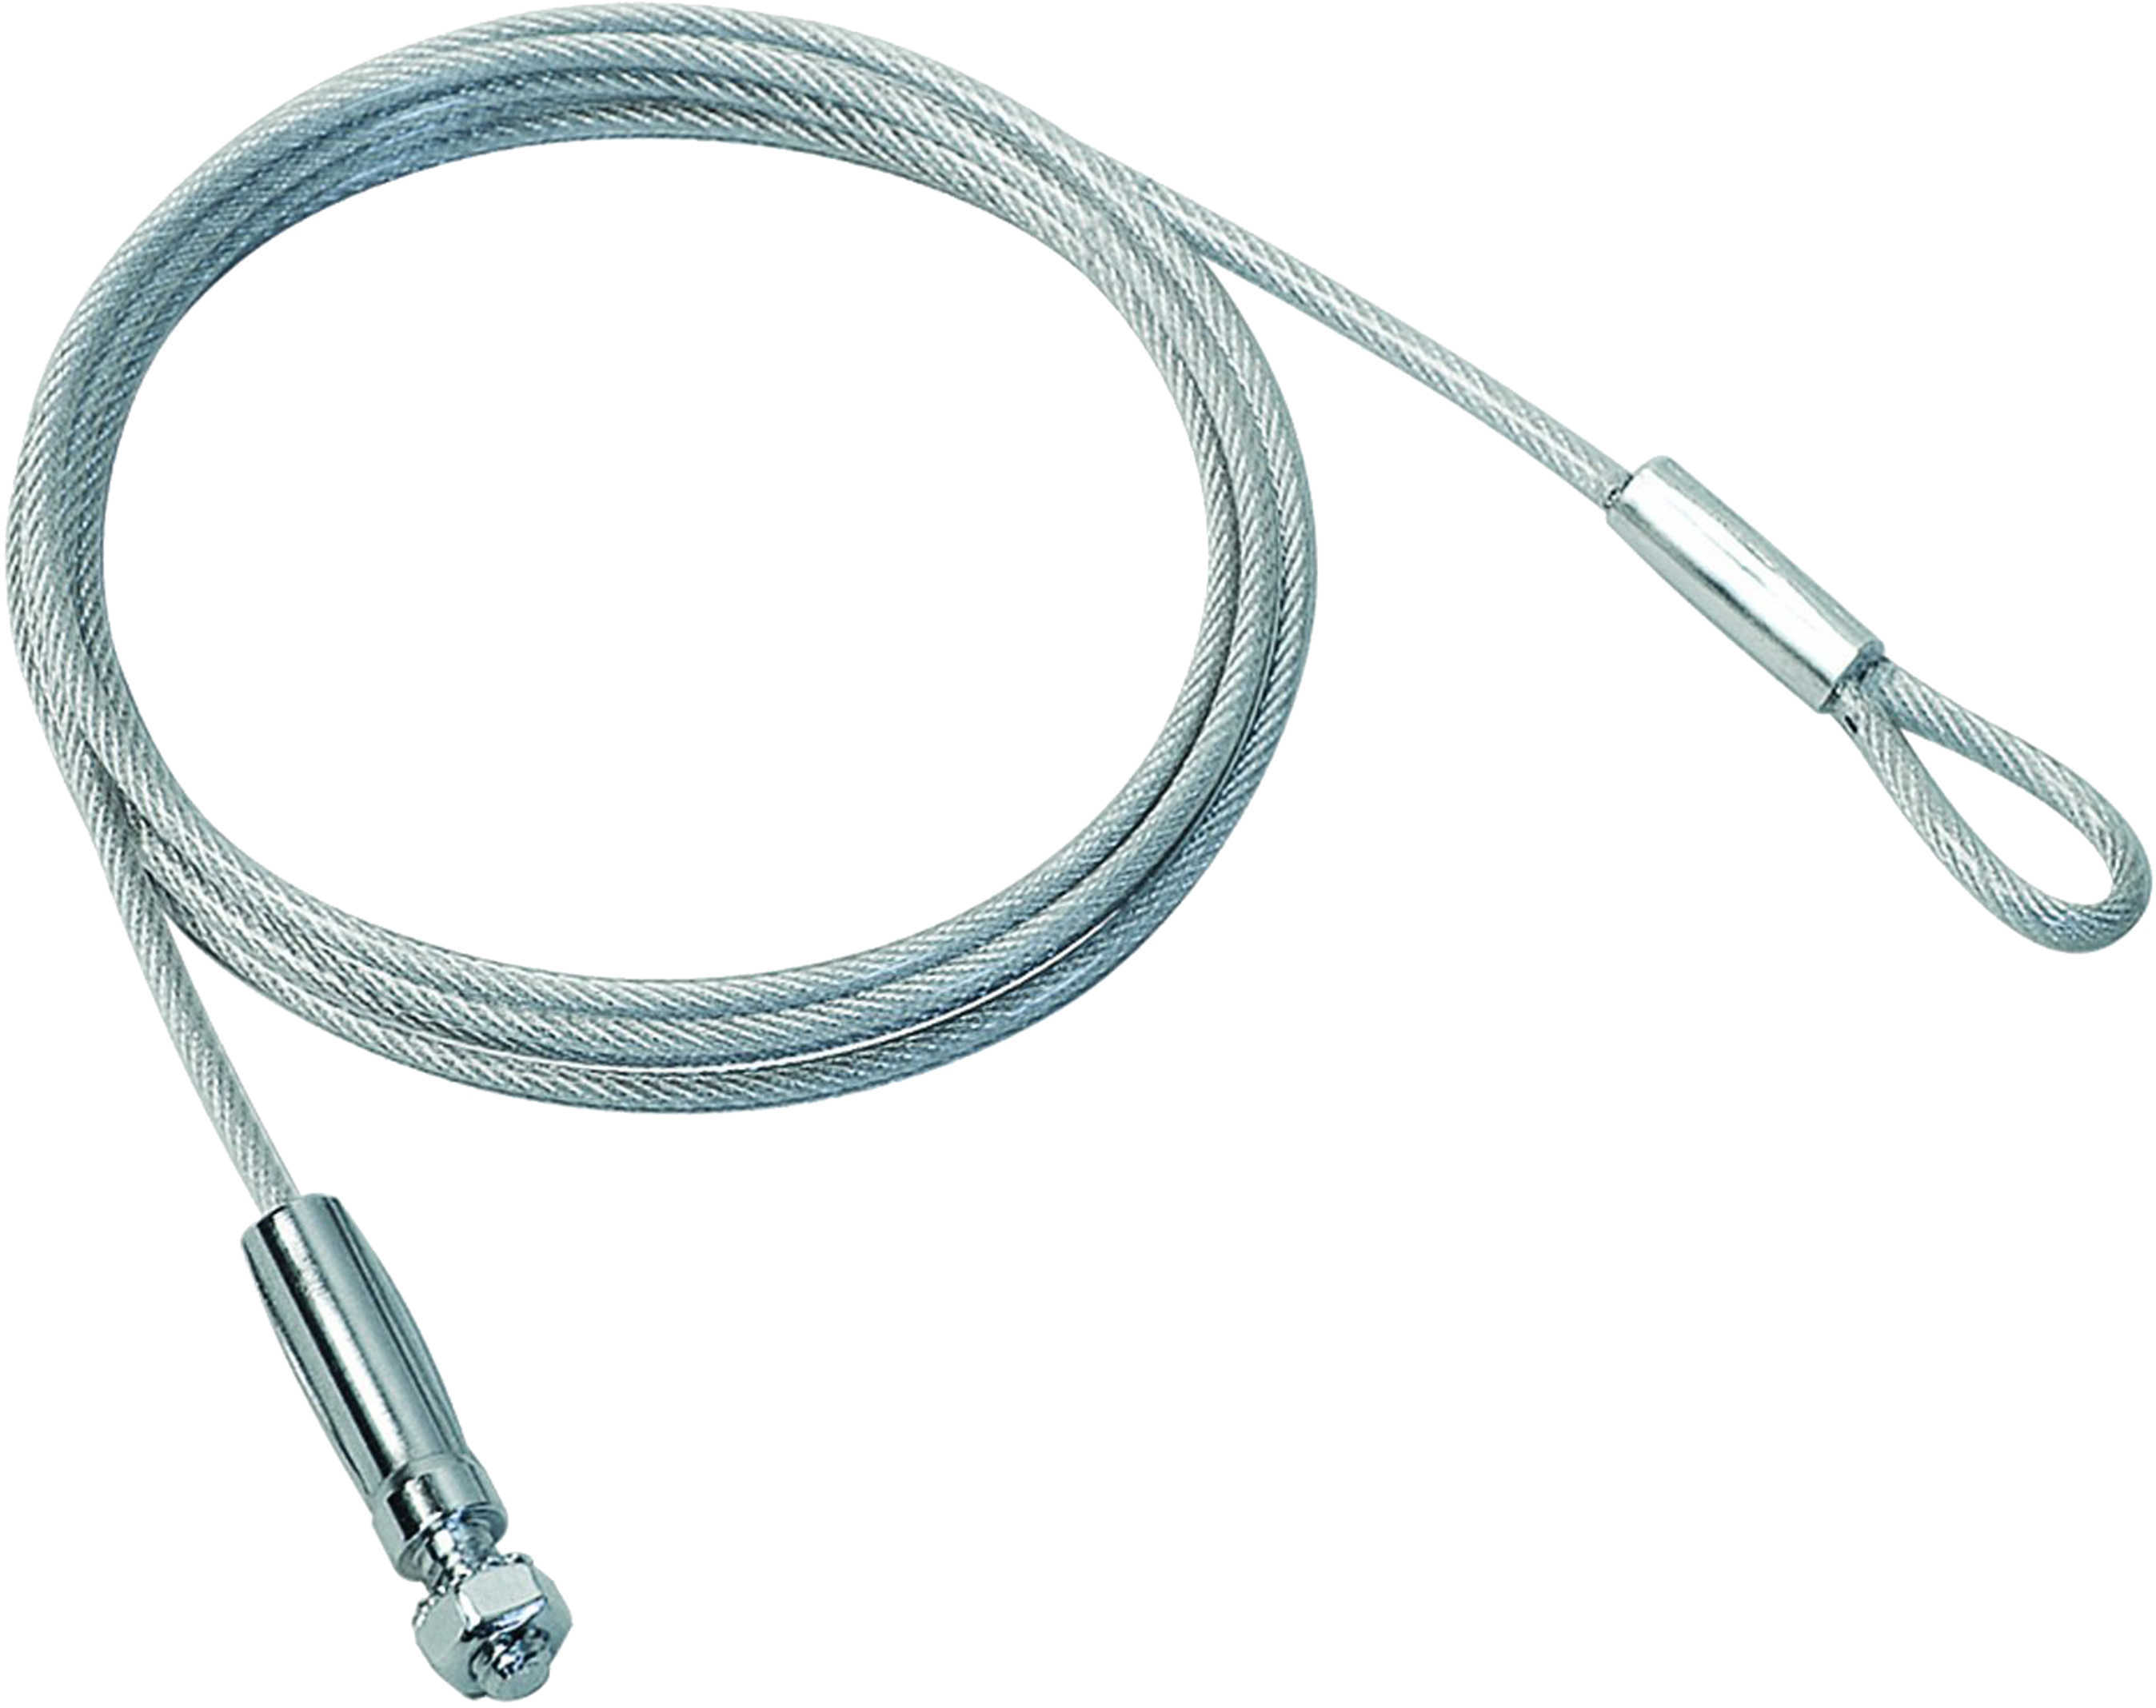 GunVault Security Cable Md: BB300